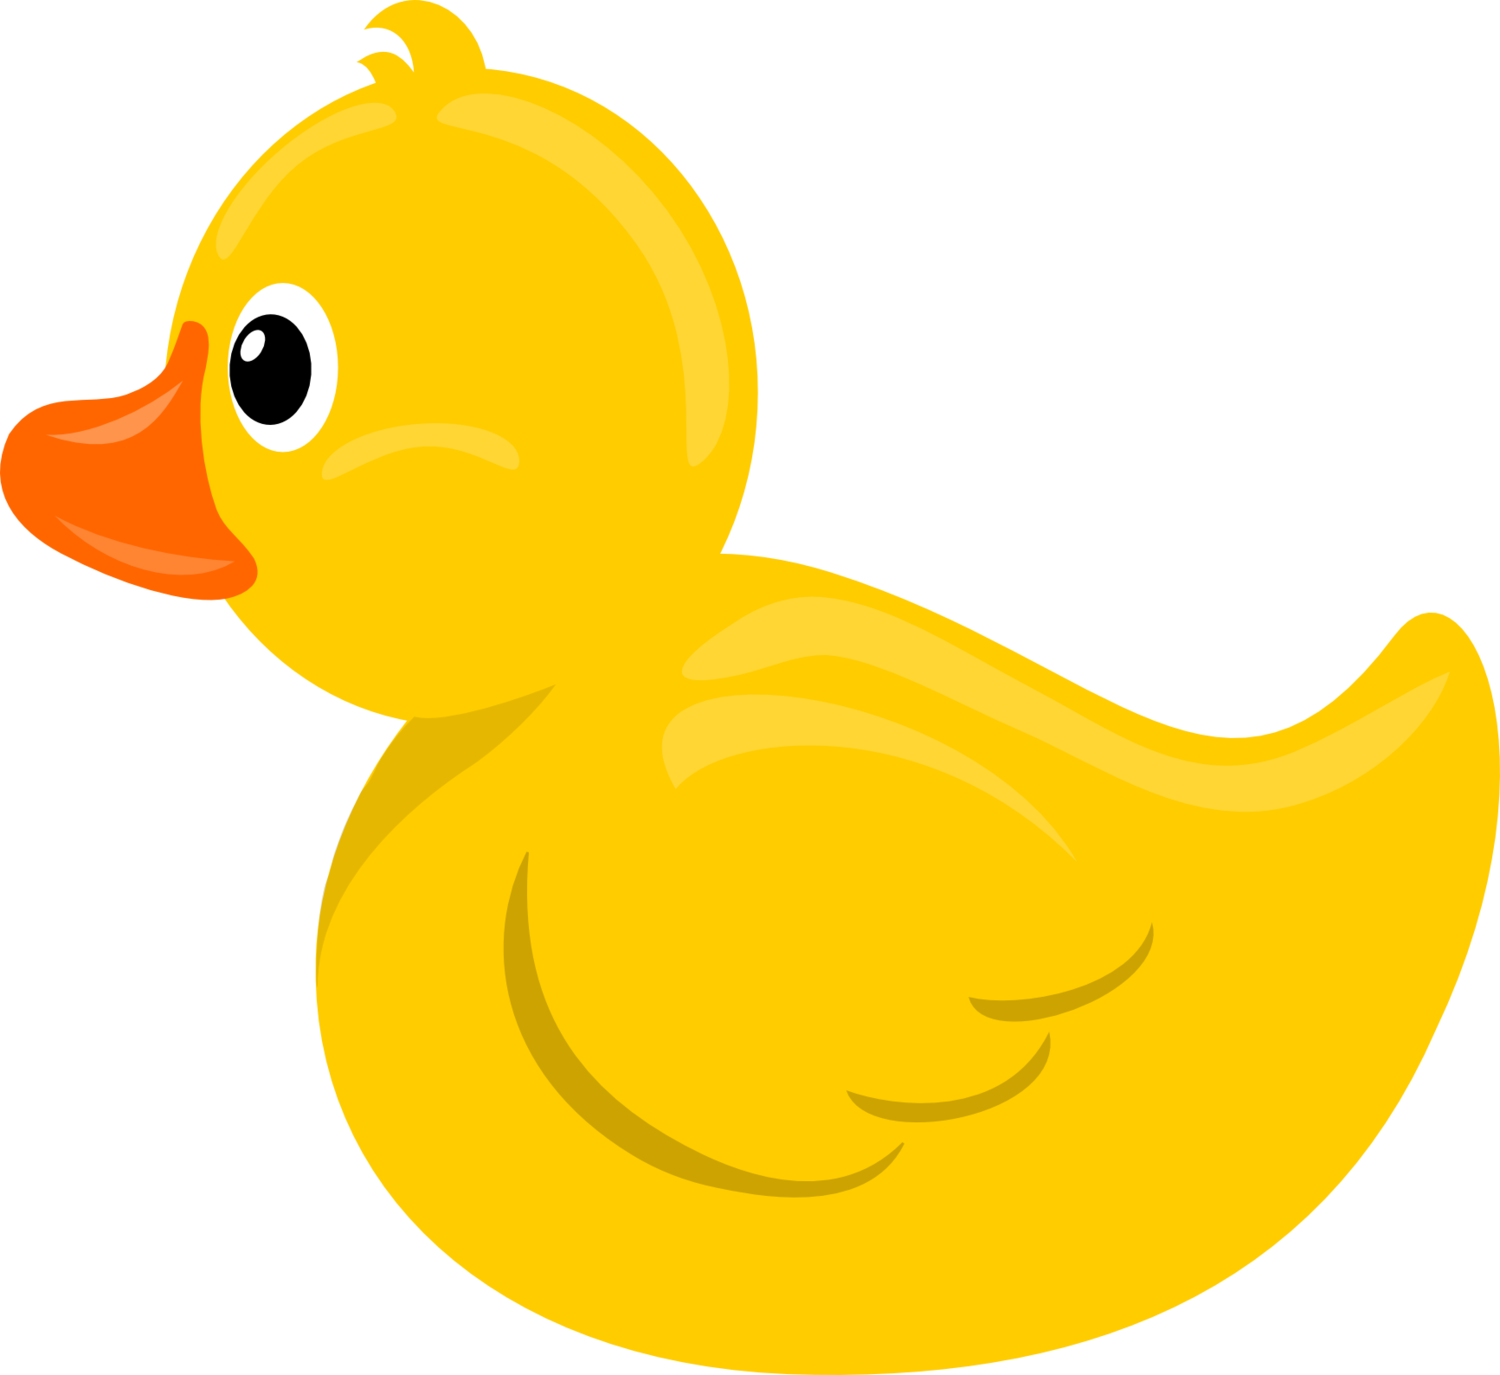 Creek watershed assoc ducky. Water clipart turtle